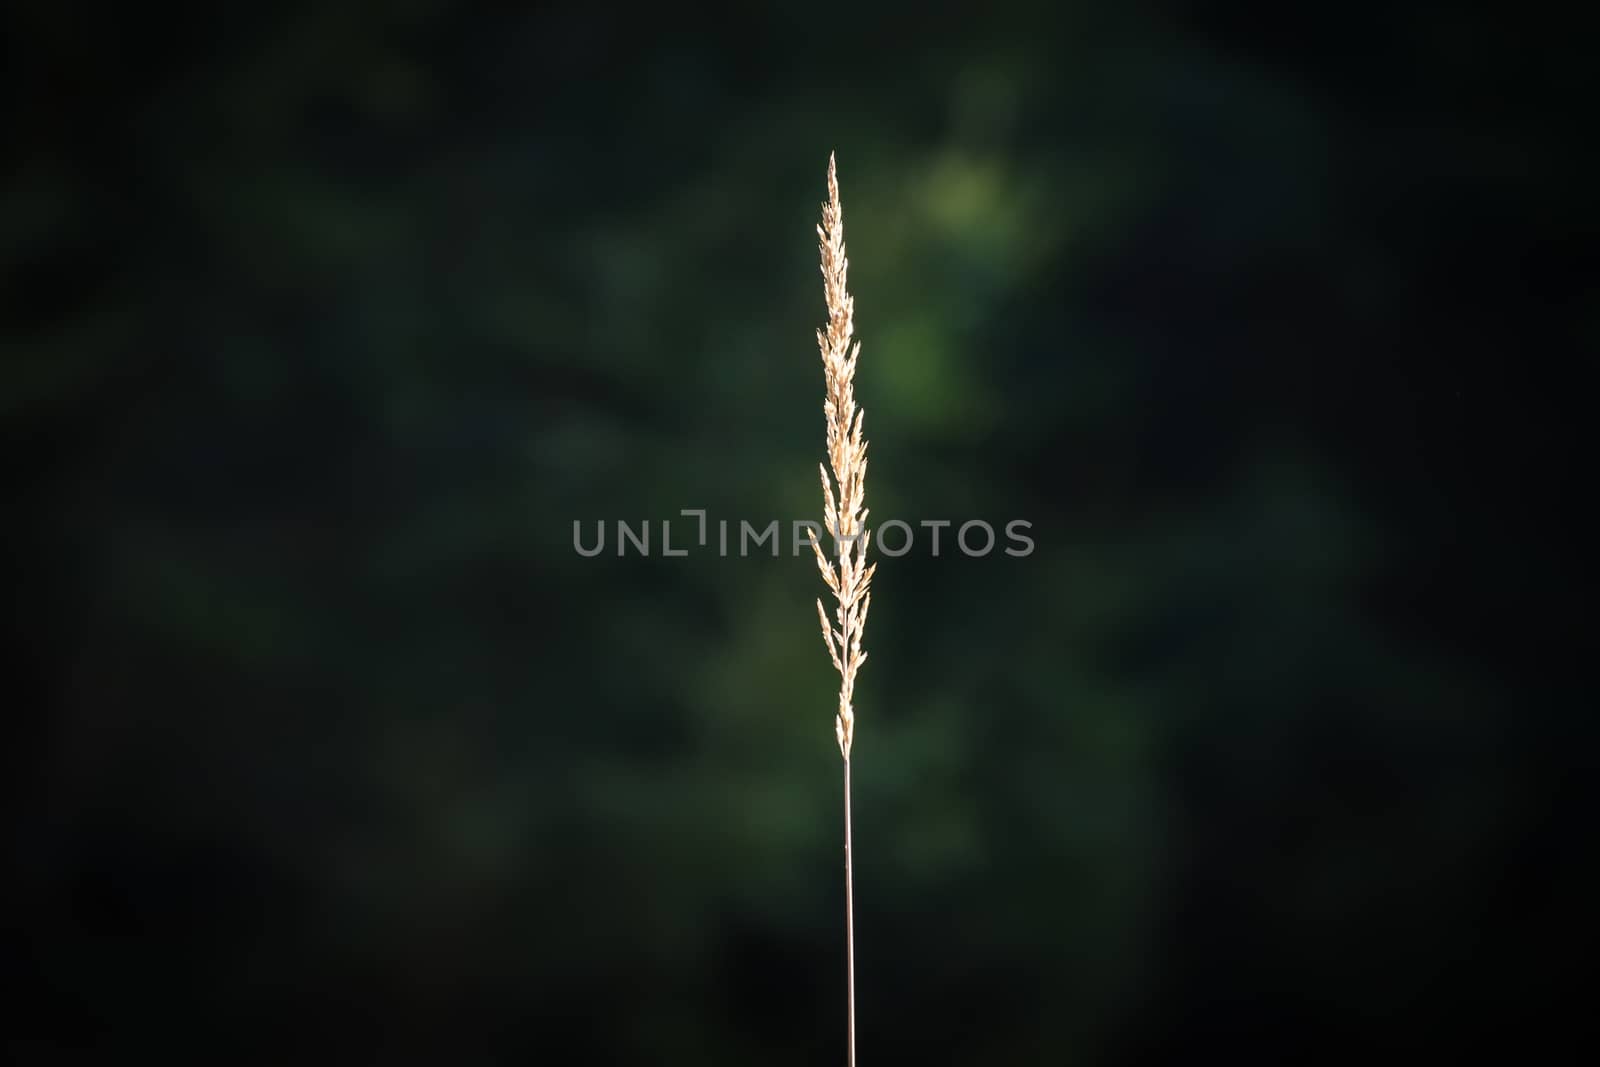 Blade of grass in the forest which is illuminated by the sun by w20er